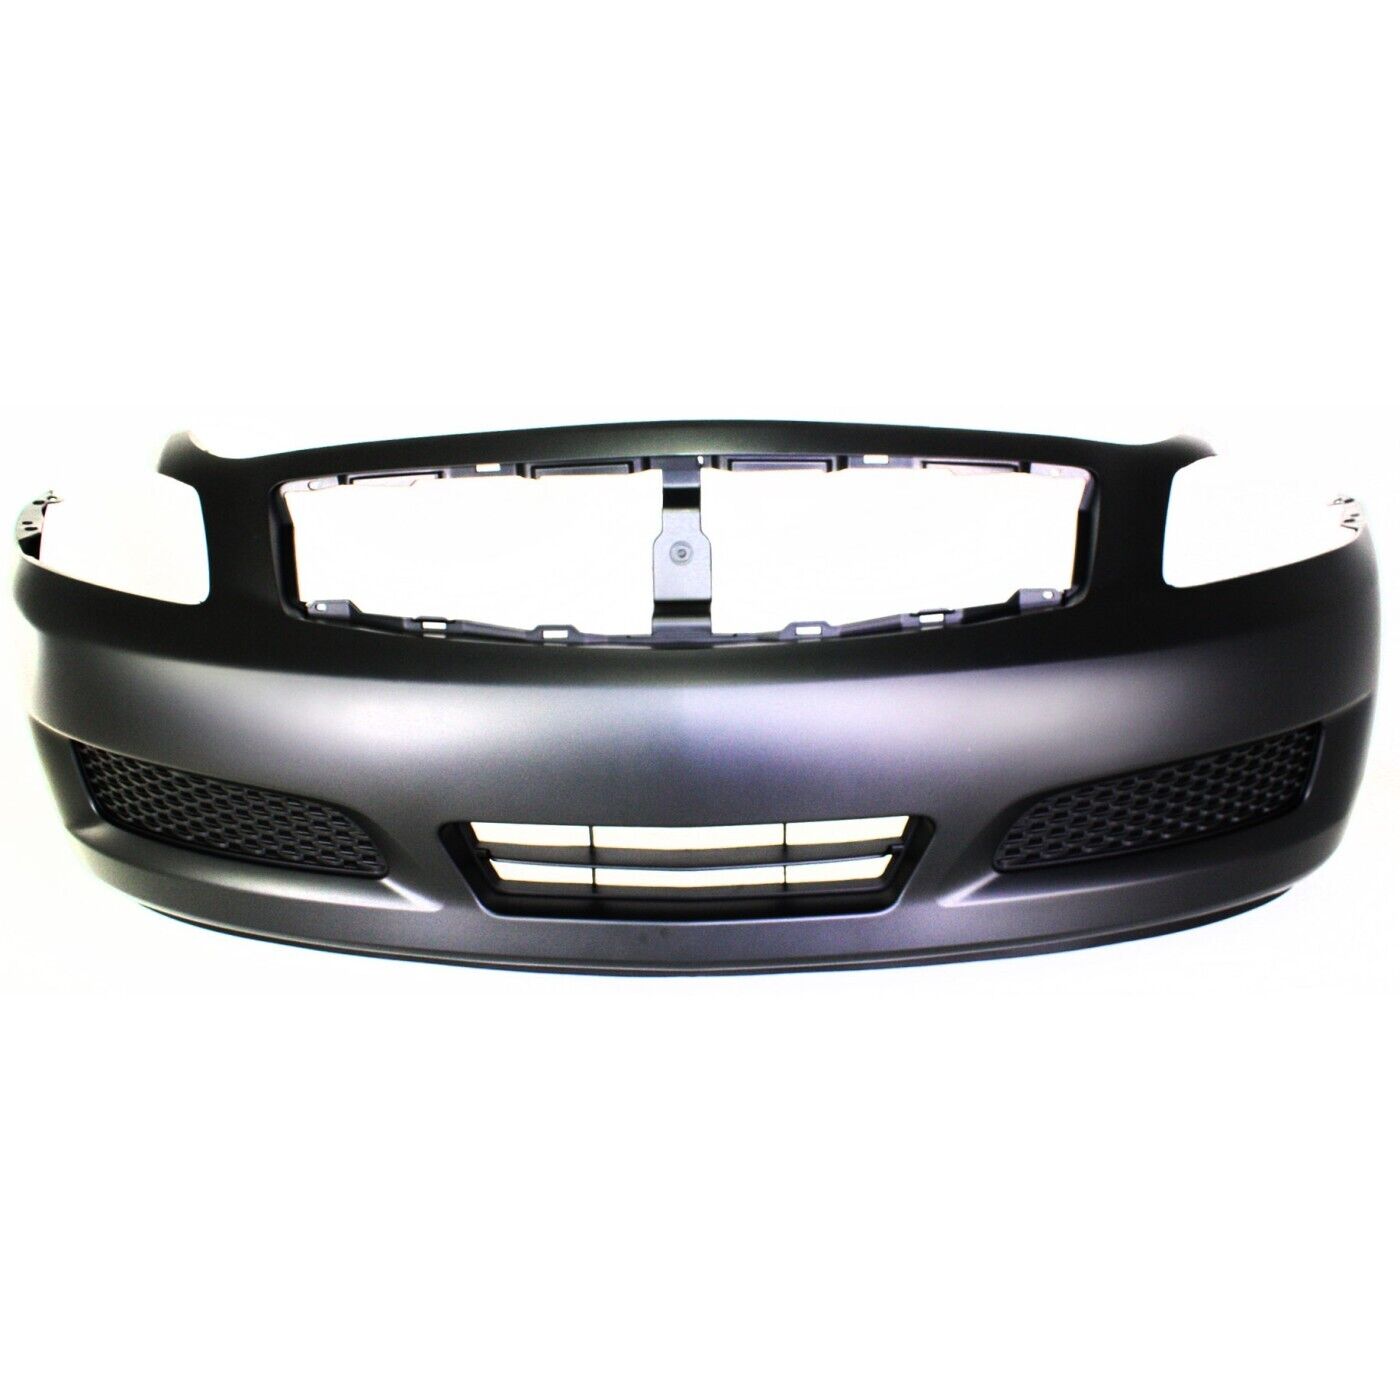 Bumper Cover For 2007-2008 Infiniti G35 Front